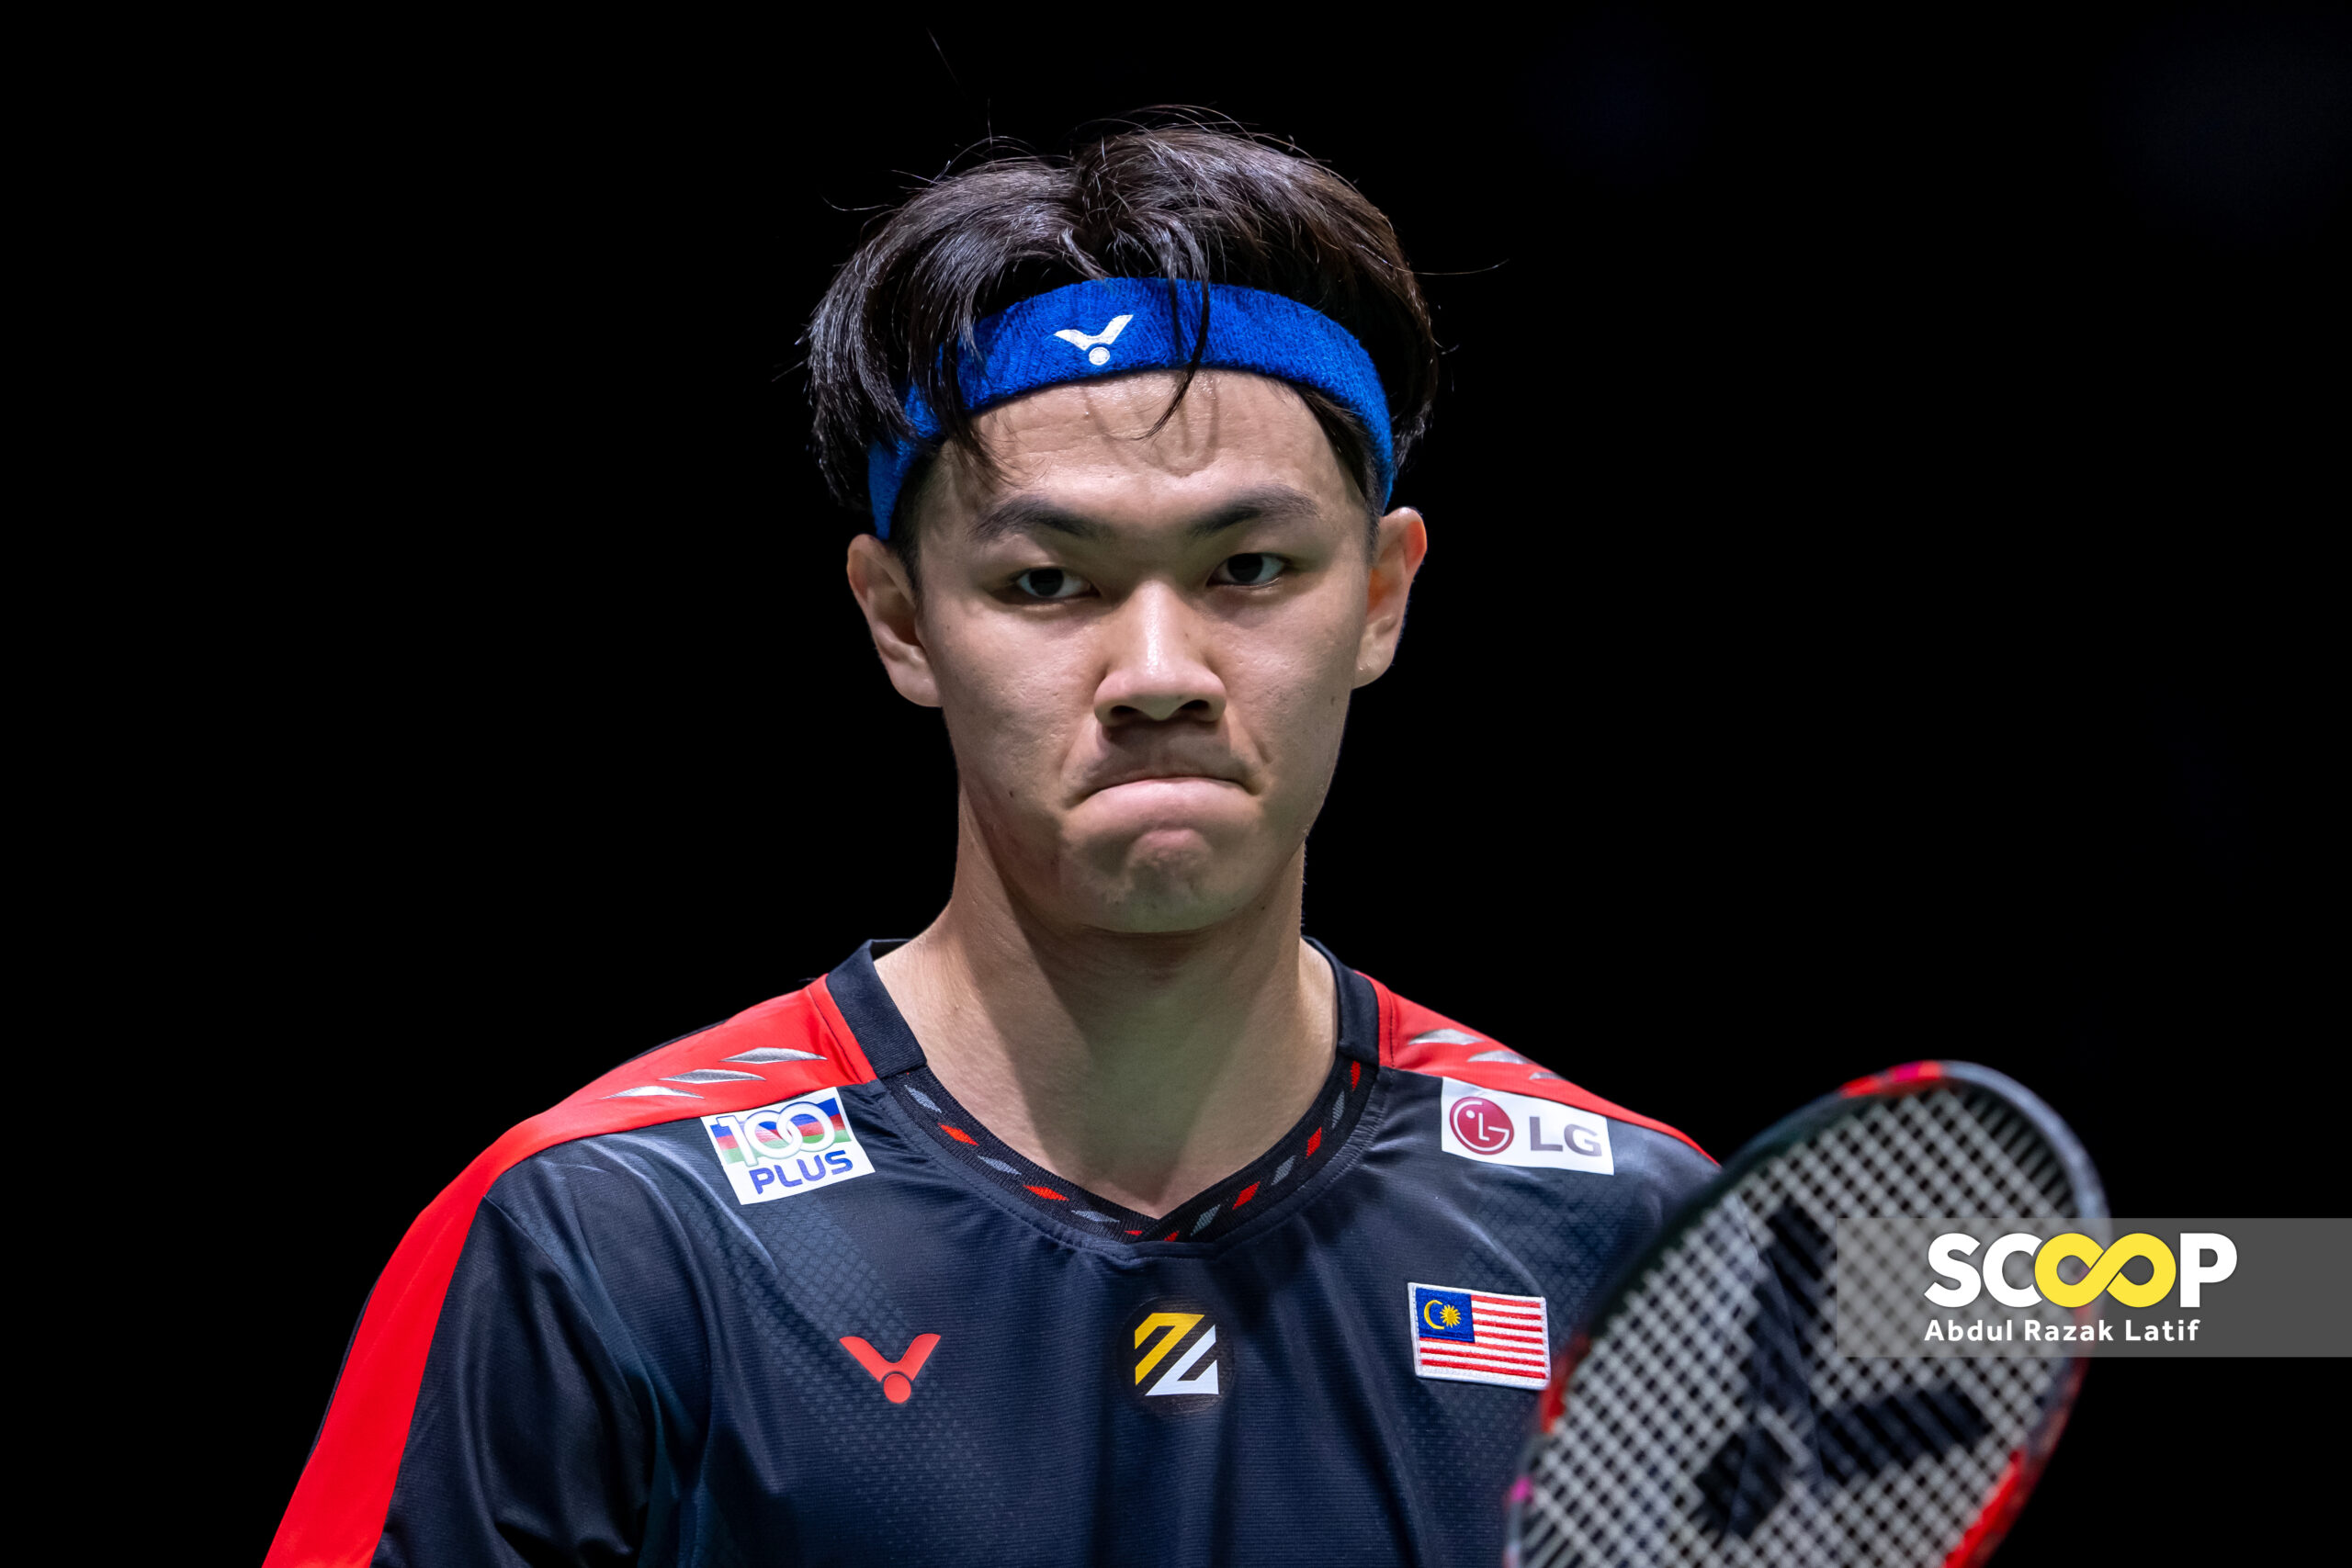 India Open: Zii Jia sees silver lining despite losing in quarterfinals